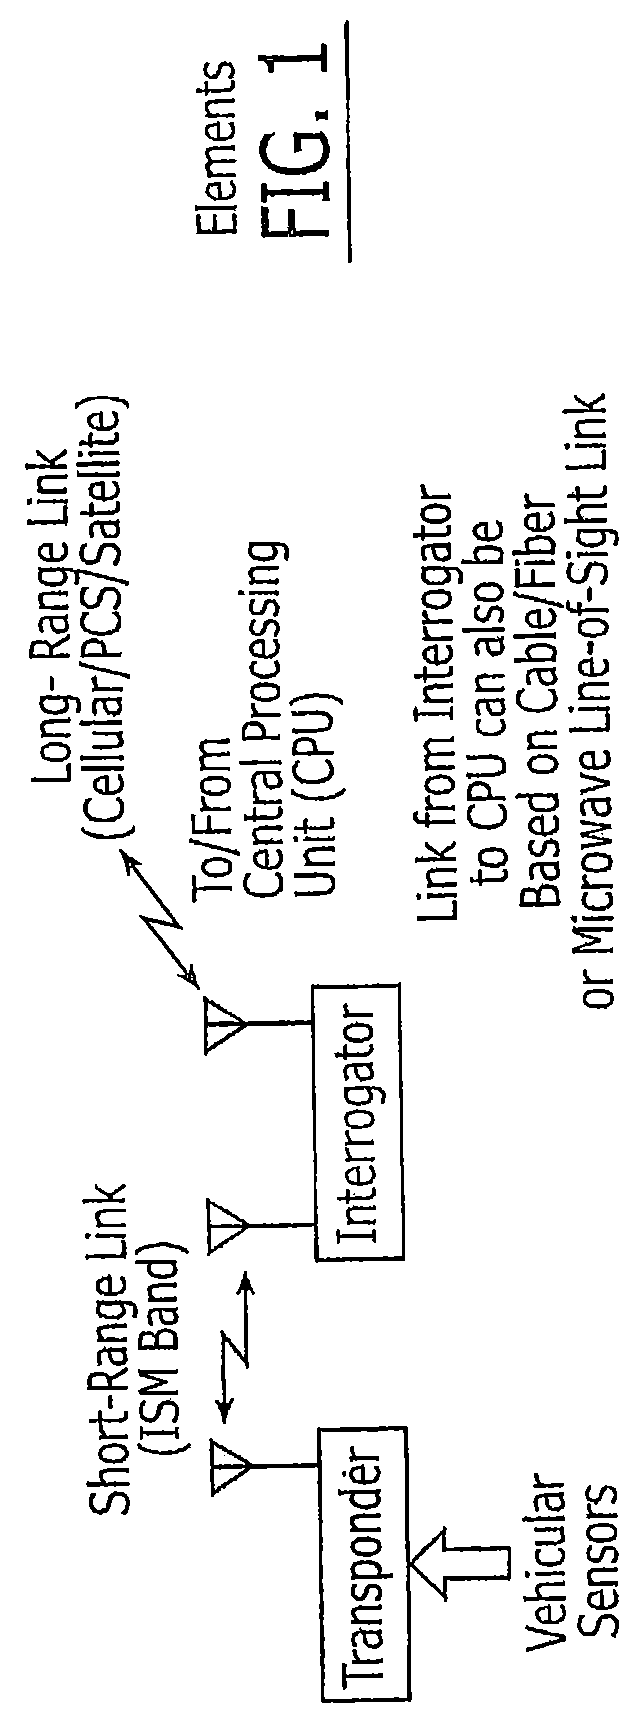 Systems and/or methods of data acquisition from a transceiver